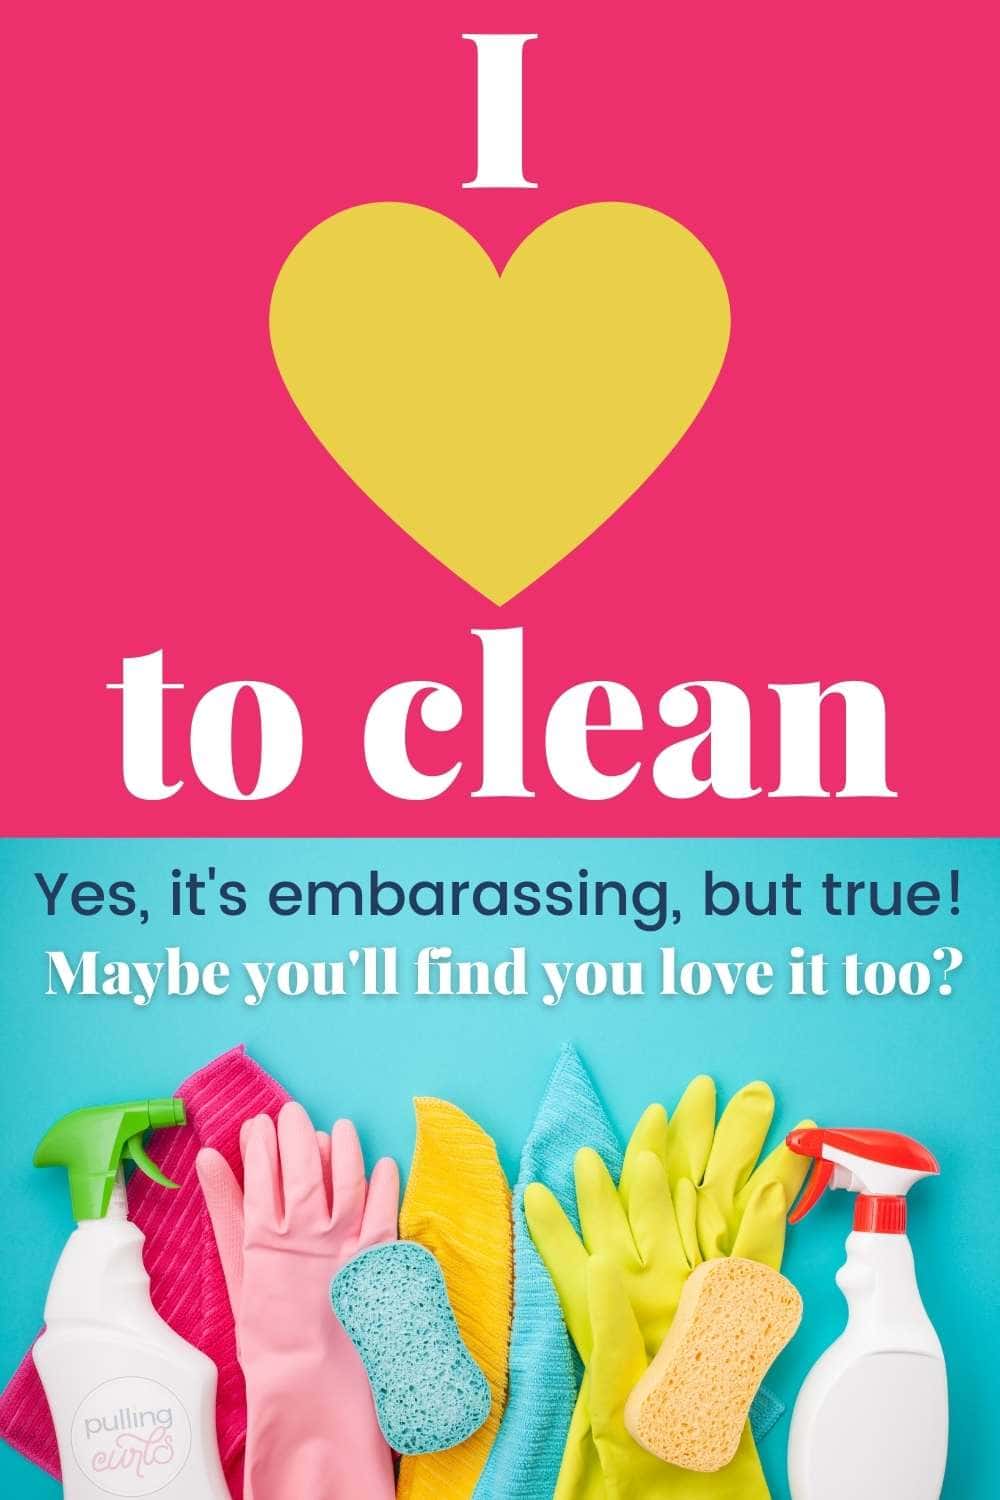 WHY do I like cleaning? Well -- maybe it's reasons you haven't thought of before -- maybe just a change in perspective will help. Click to find out if YOU love cleaning too? #clean #cleaning #cleaner via @pullingcurls